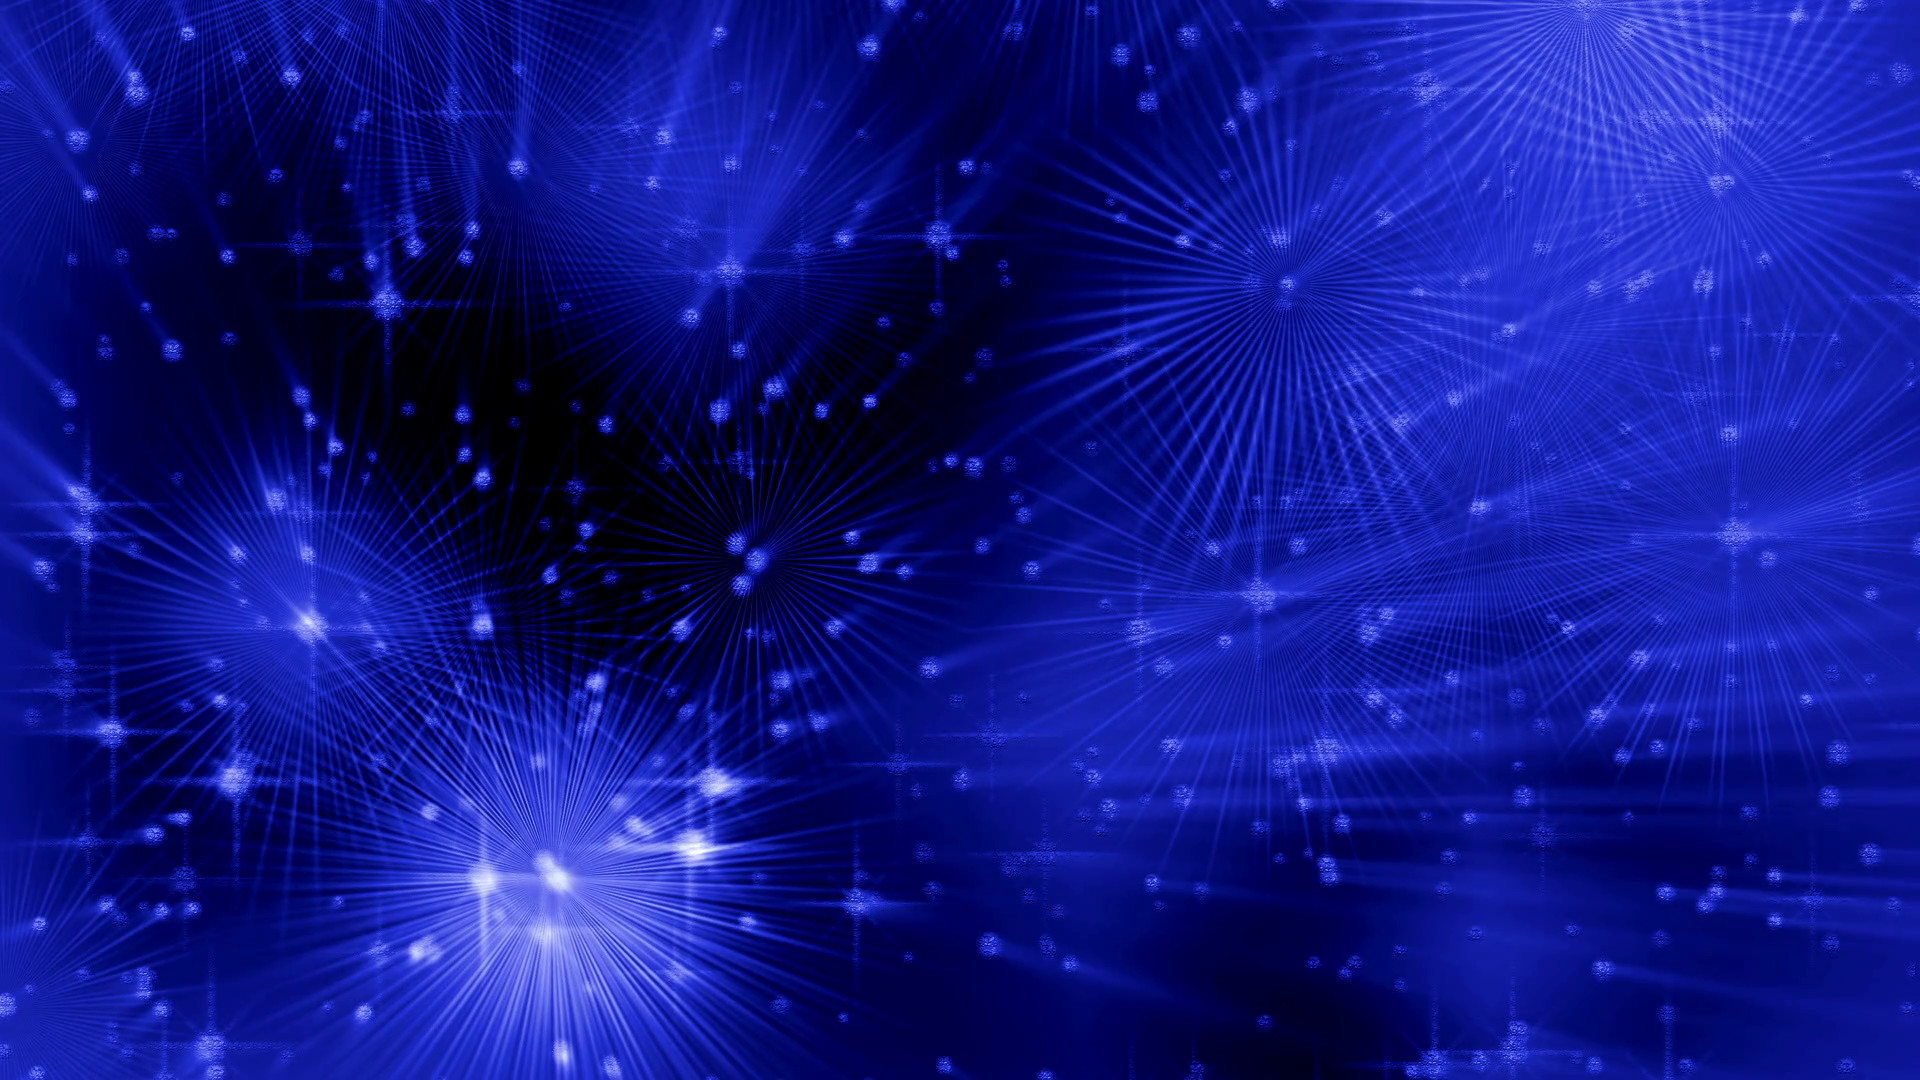 1920x1080 Festive blue abstract background with rays and dots of light, circular  motion, linear stream with starry motion rotating, animated illustration,  30fps, ...